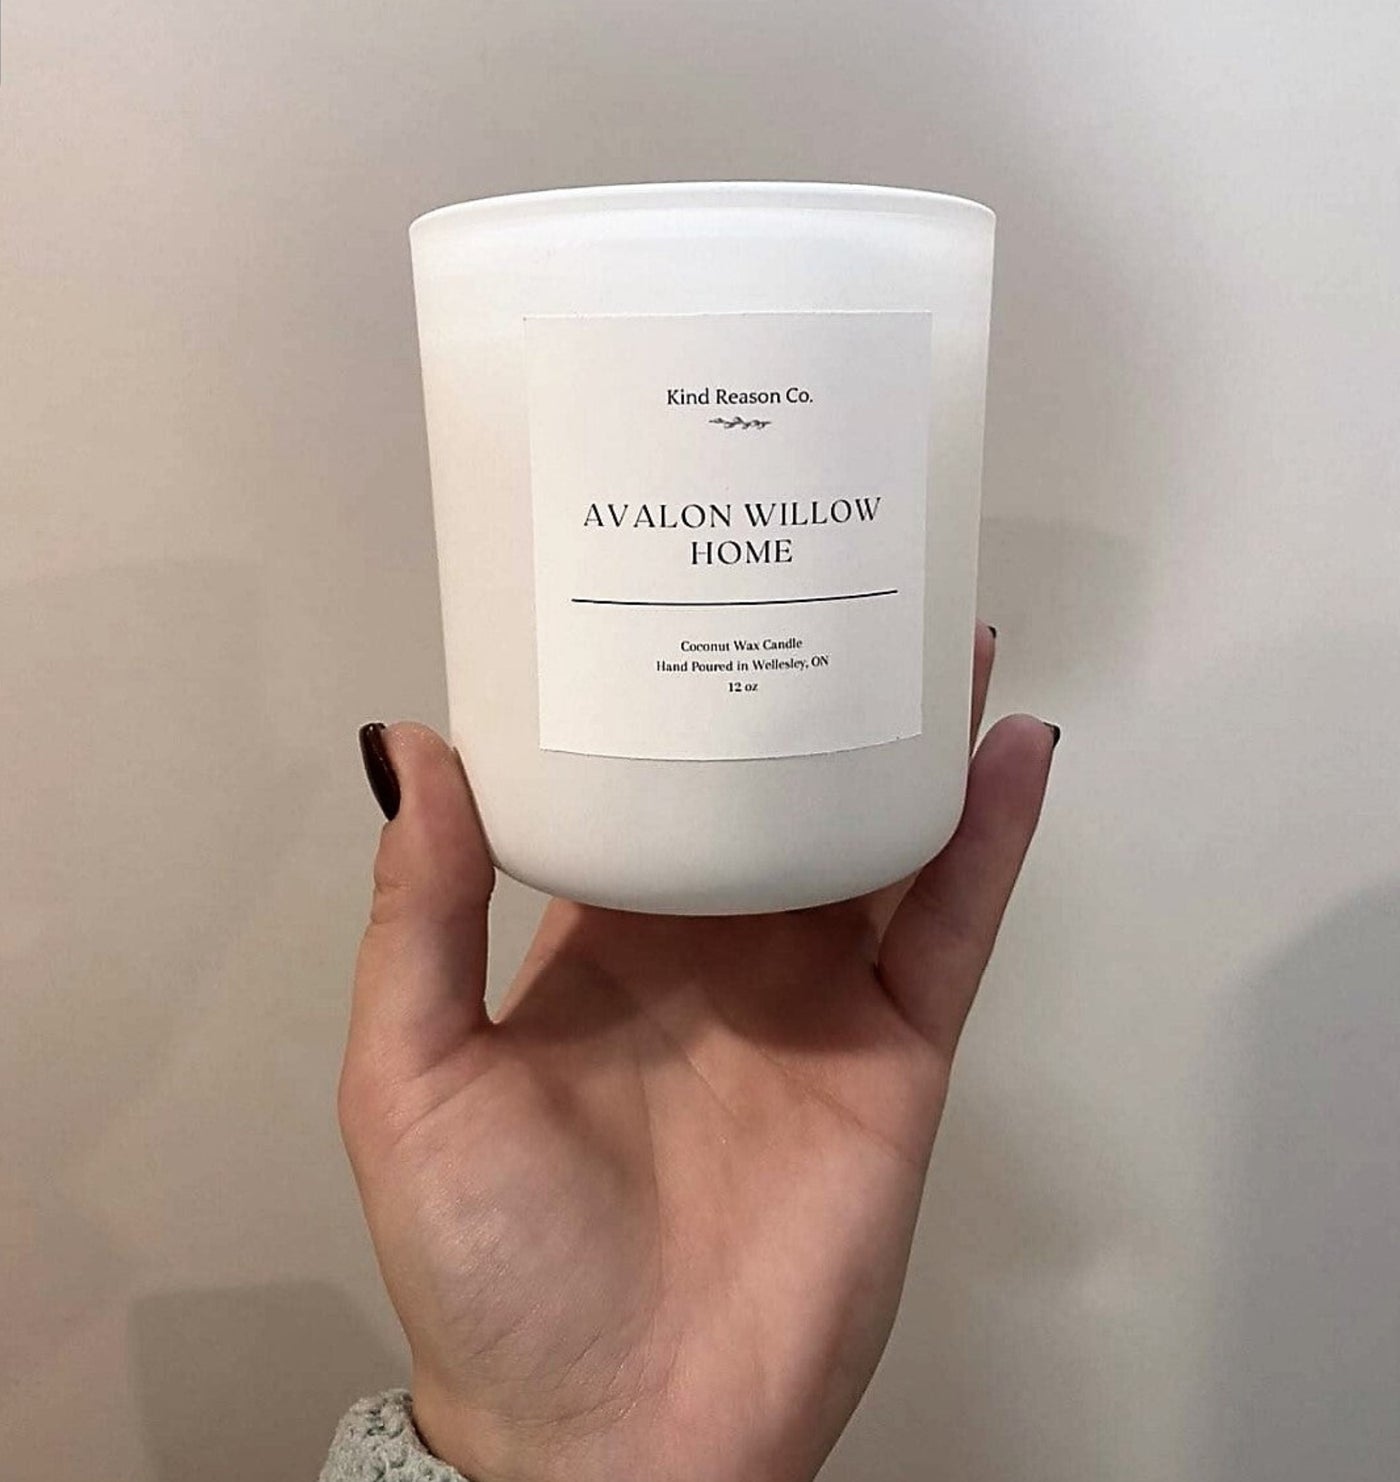 Avalon Willow Home Candle: Toxin-Free, crafted with all-natural ingredients